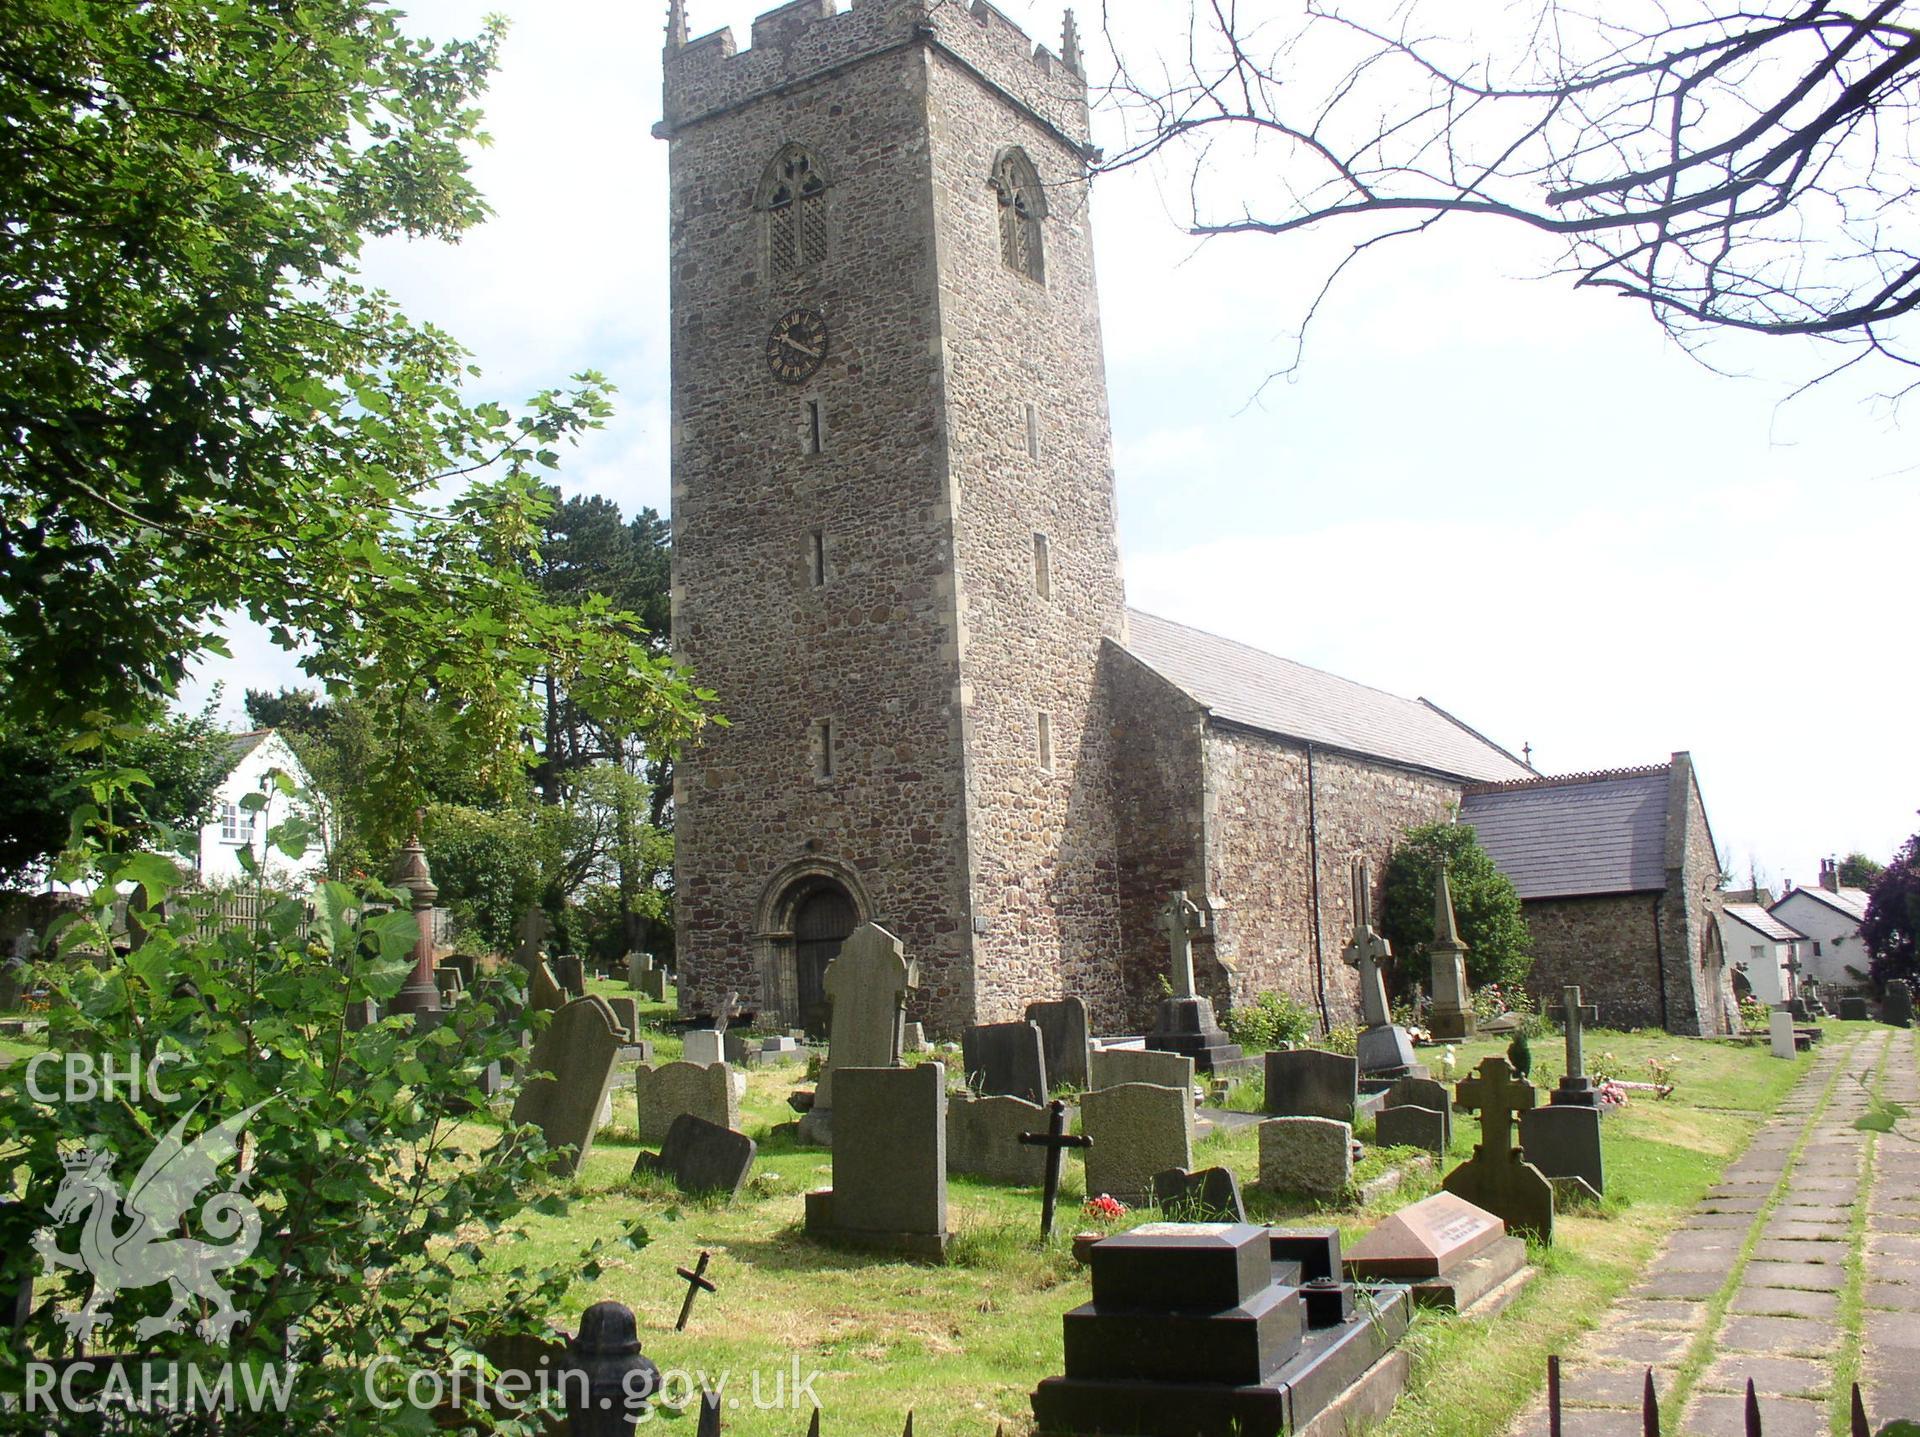 Colour digital photograph showing the exterior of St. Augustine's Church, Rumney; Cardiff.